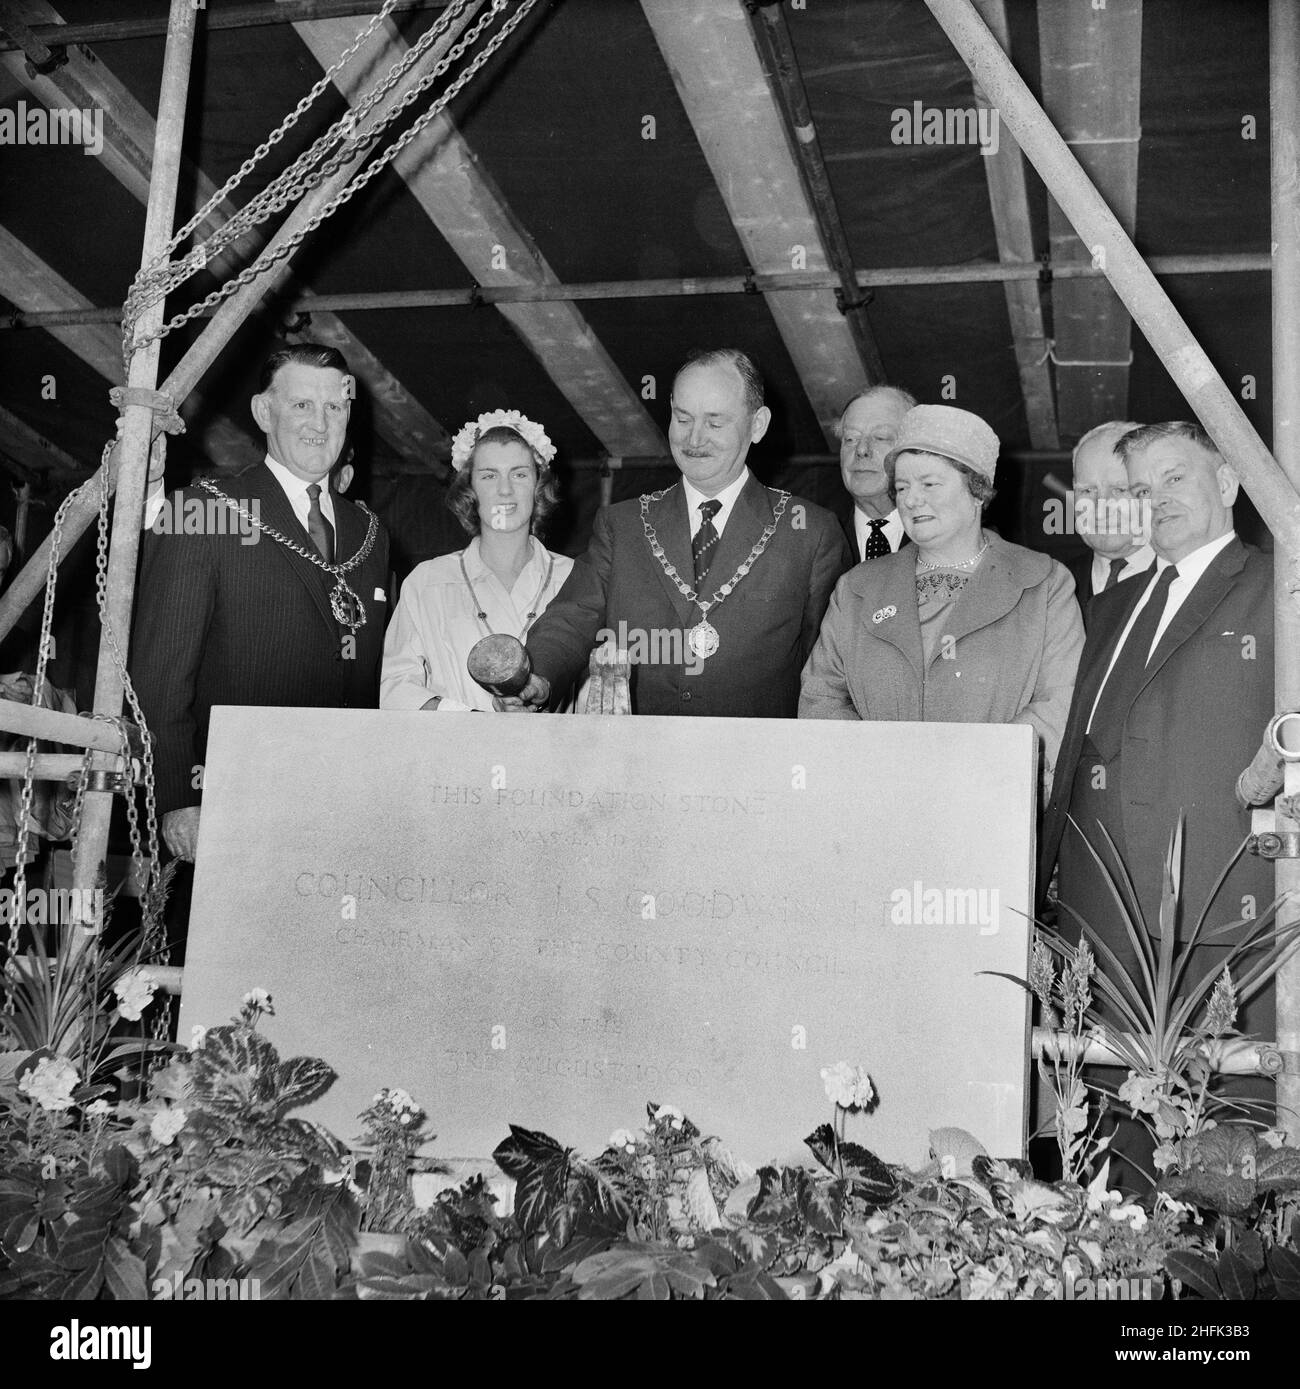 County Hall, A6352, Aykley Heads, Durham, County Durham, 03/08/1960. Councillor JS Goodwin, Chairman of Durham County Council, with a group of dignitaries ceremonially laying the foundation stone for the County Offices at Durham. John Laing and Son Ltd were contracted to build new county offices at Aykley Heads, Durham. The difficult task of levelling the hilltop site began in November 1959. The work was completed in 1963 and HRH Prince Philip, the Duke of Edinburgh, officially opened the county offices on 14th October. The complex included committee rooms, a main office block, hexagonal counc Stock Photo